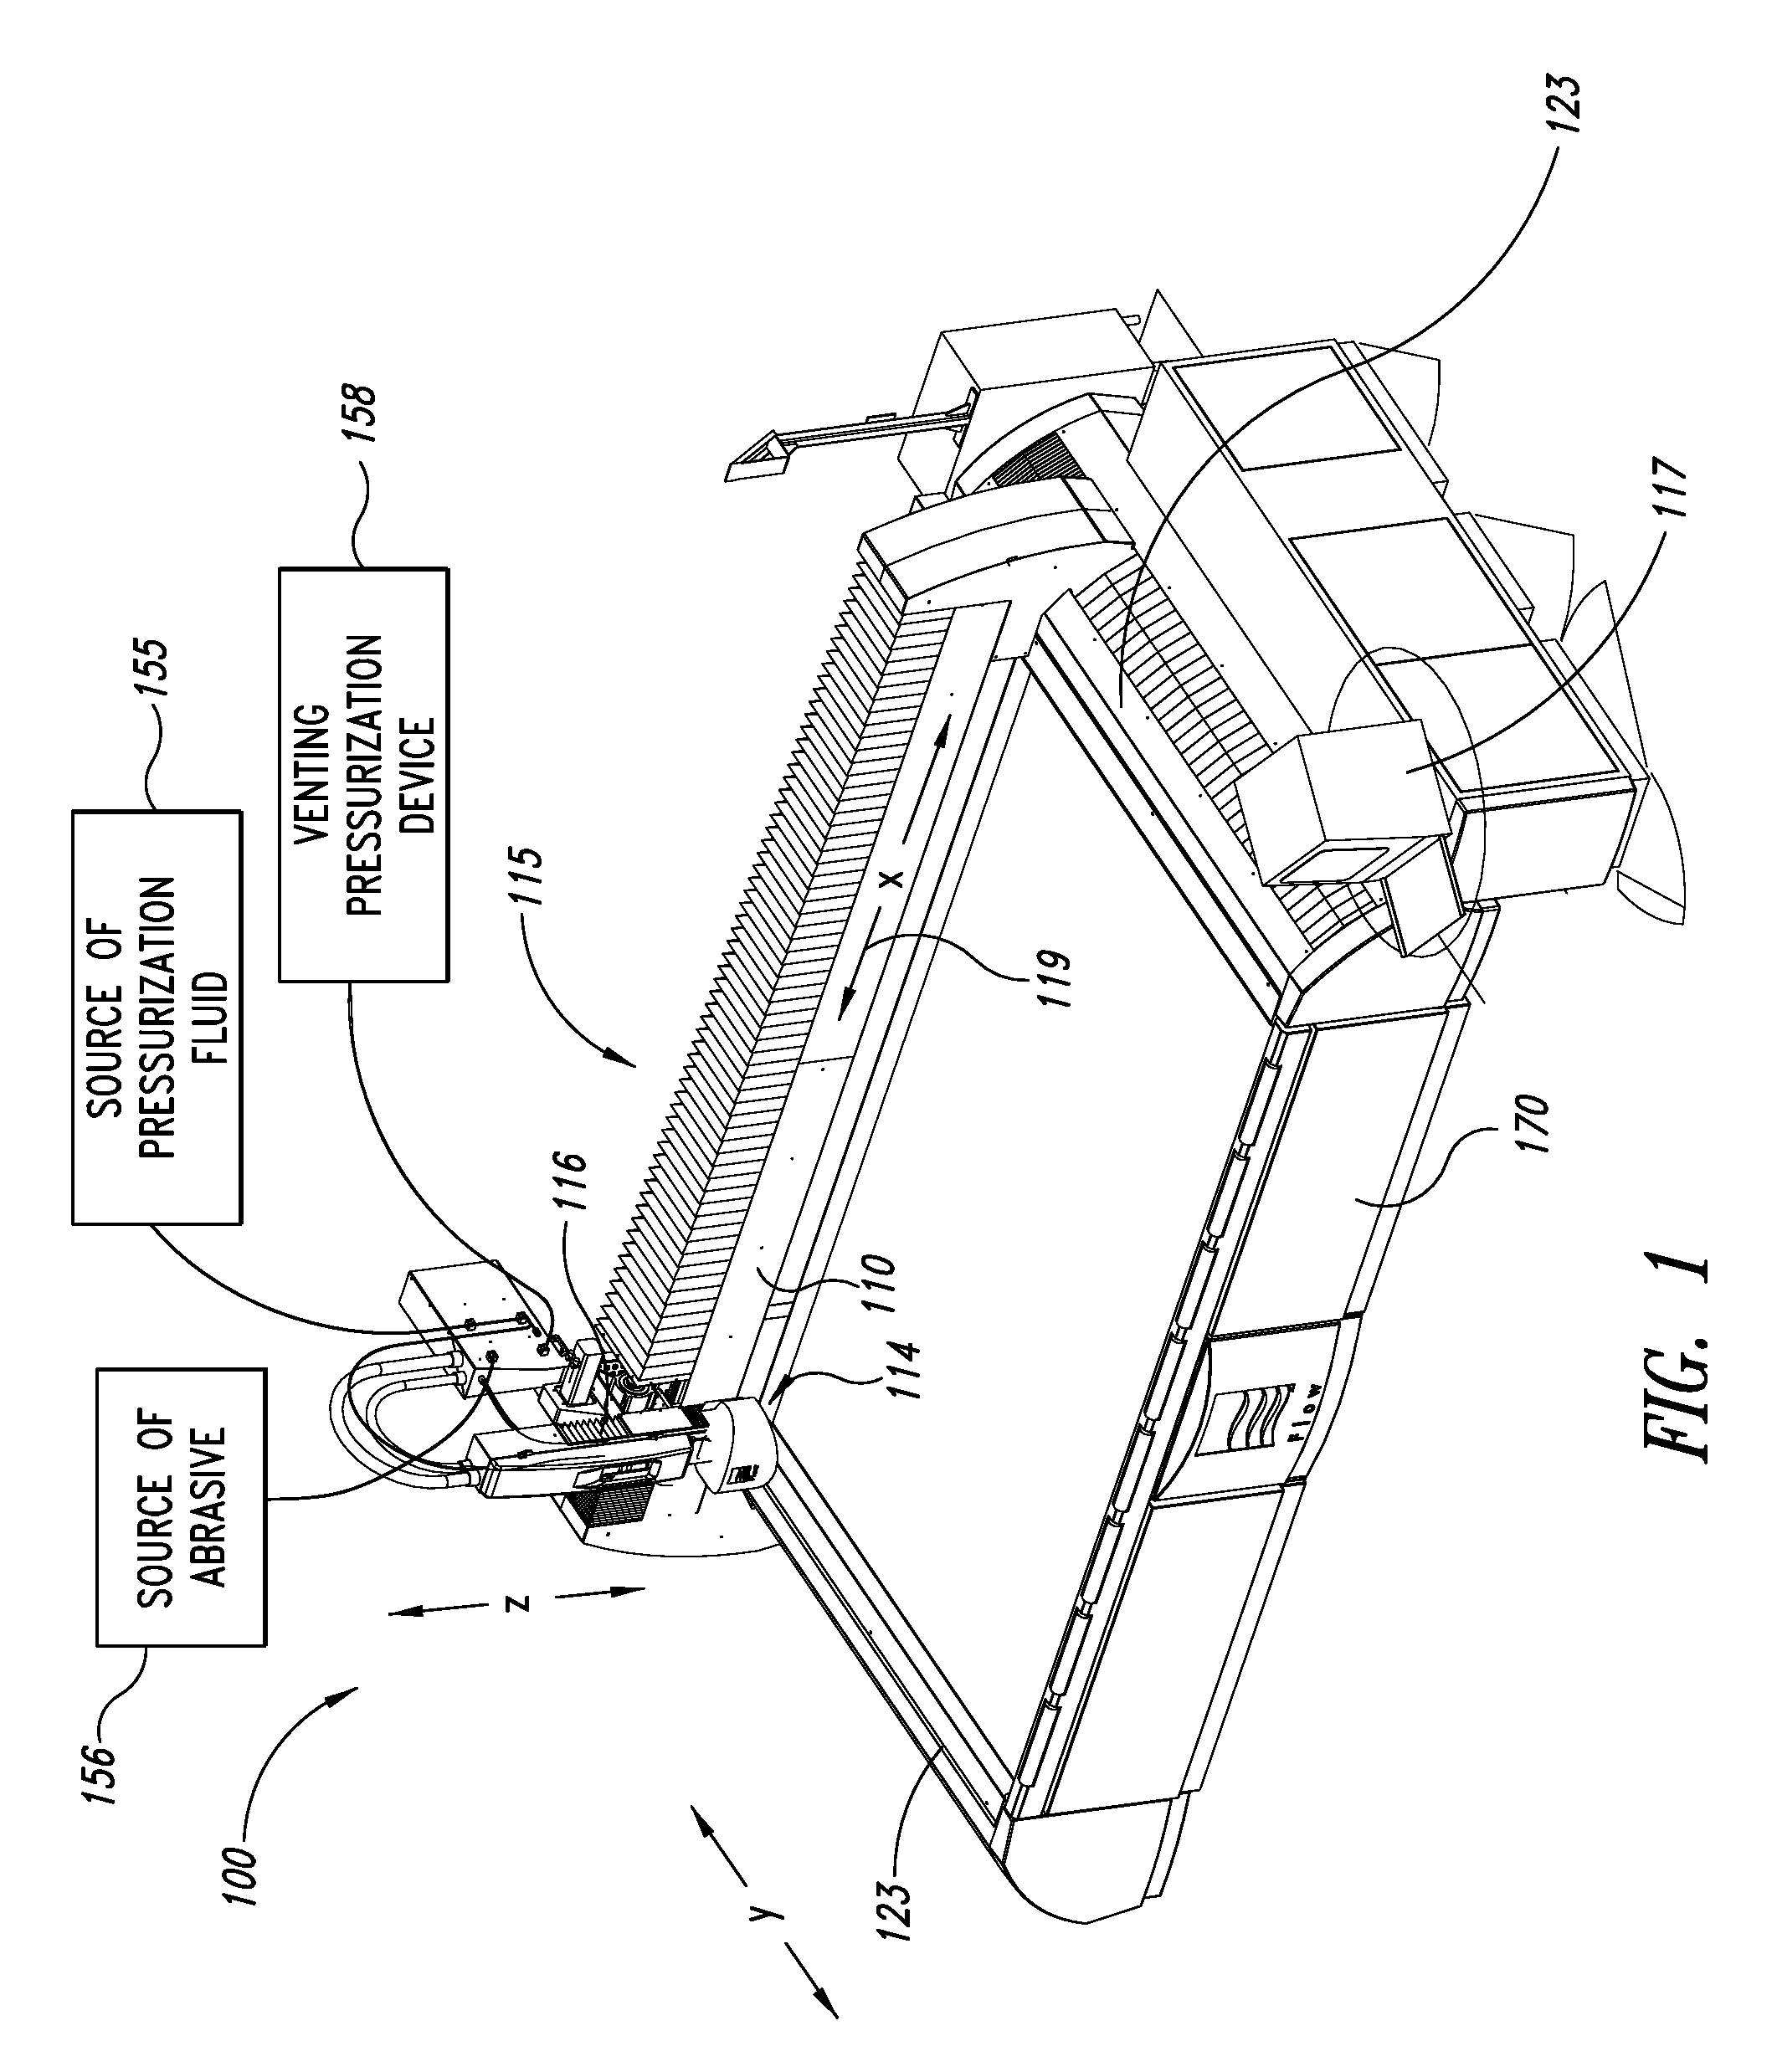 Vented cutting head body for abrasive jet system